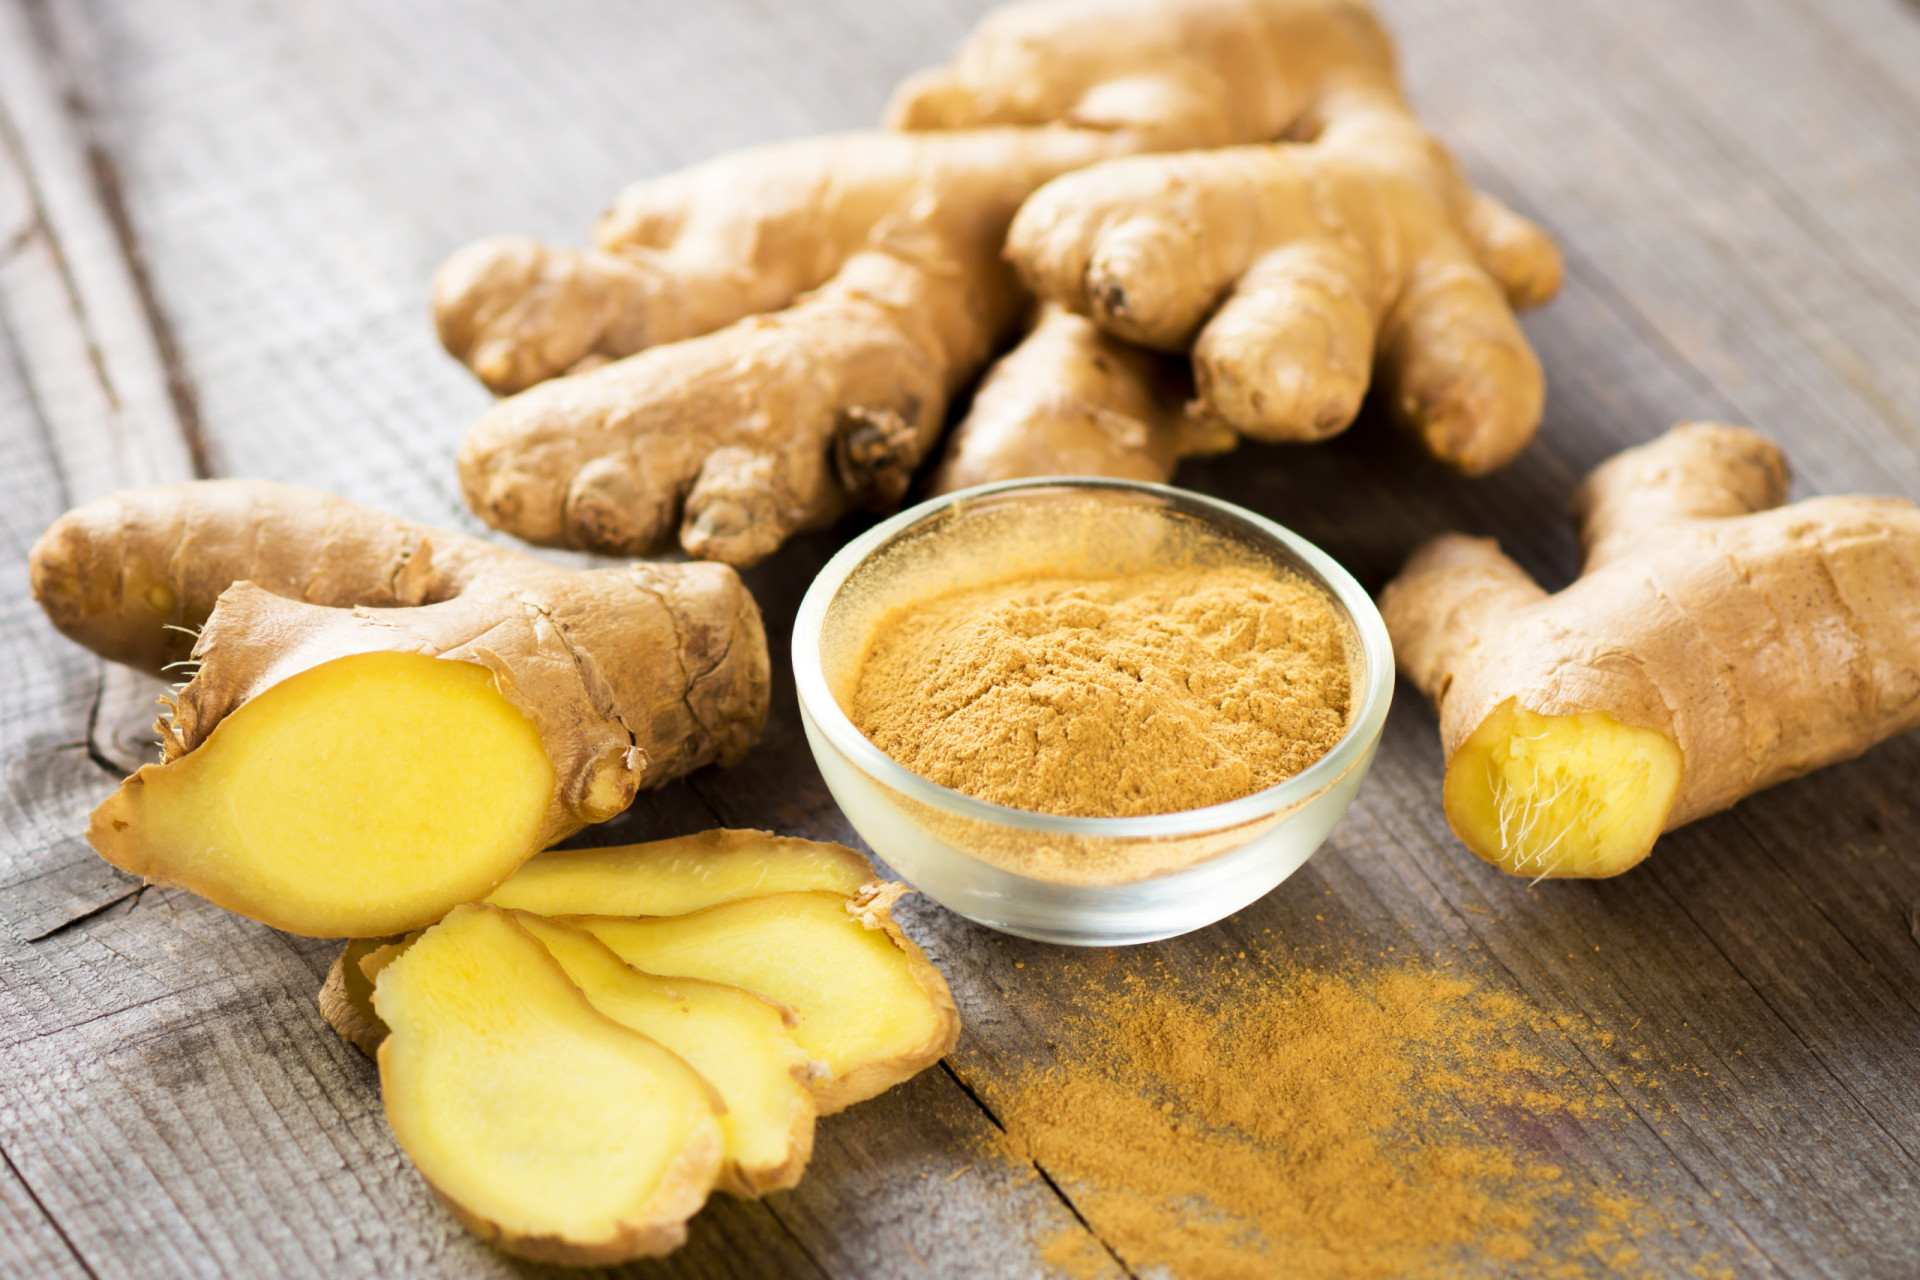 <p>Ginger (<em>zingiber officinale</em>) may increase the effectiveness of phenprocoumon and therefore increase the risk of bleeding when taken with warfarin. It may also interact with nifedipine, producing a synergistic antiplatelet effect.</p><p><a href="https://www.msn.com/en-us/community/channel/vid-7xx8mnucu55yw63we9va2gwr7uihbxwc68fxqp25x6tg4ftibpra?cvid=94631541bc0f4f89bfd59158d696ad7e">Follow us and access great exclusive content every day</a></p>